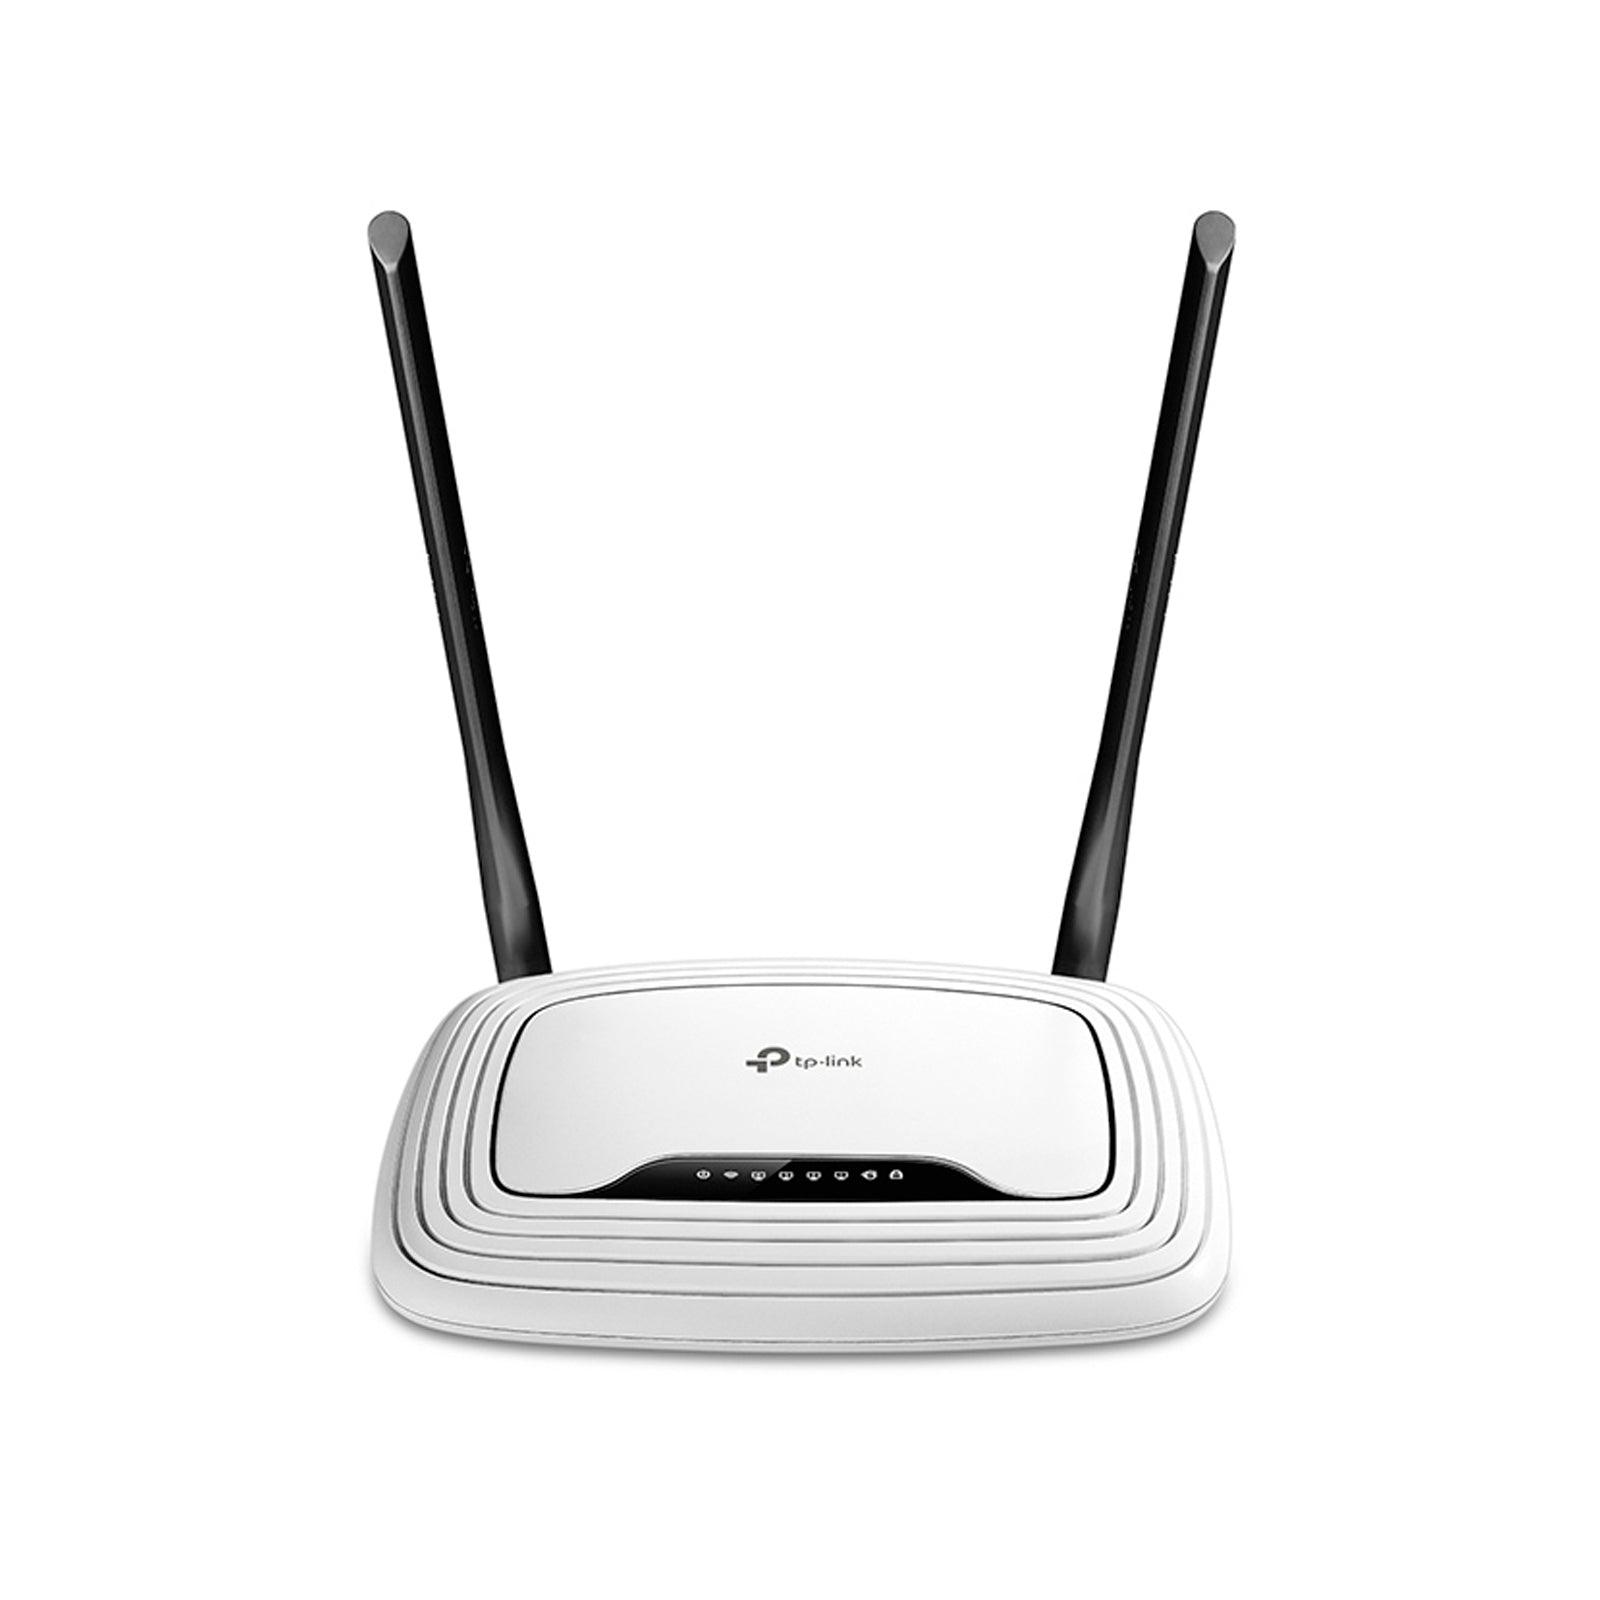 TP-Link TL-WR841N | 300Mbps Wireless N WiFi Router - Kosmos Renew